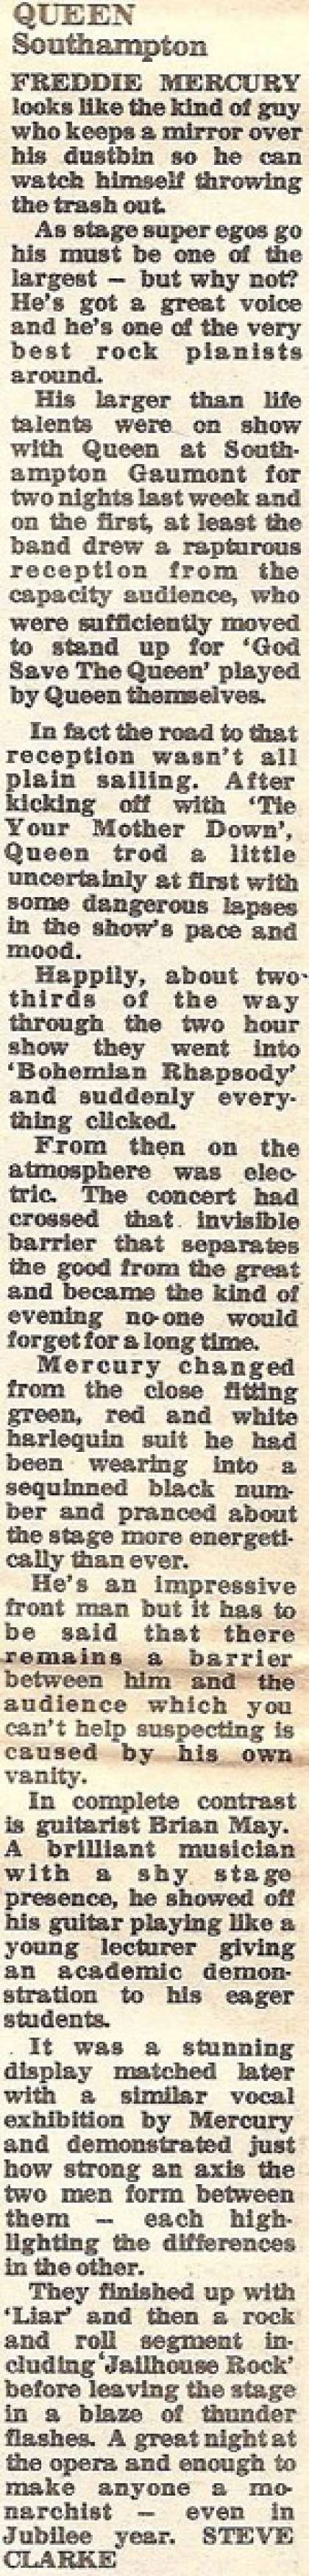 Newspaper review: Queen live at the Gaumont, Southampton, UK [26.05.1977]